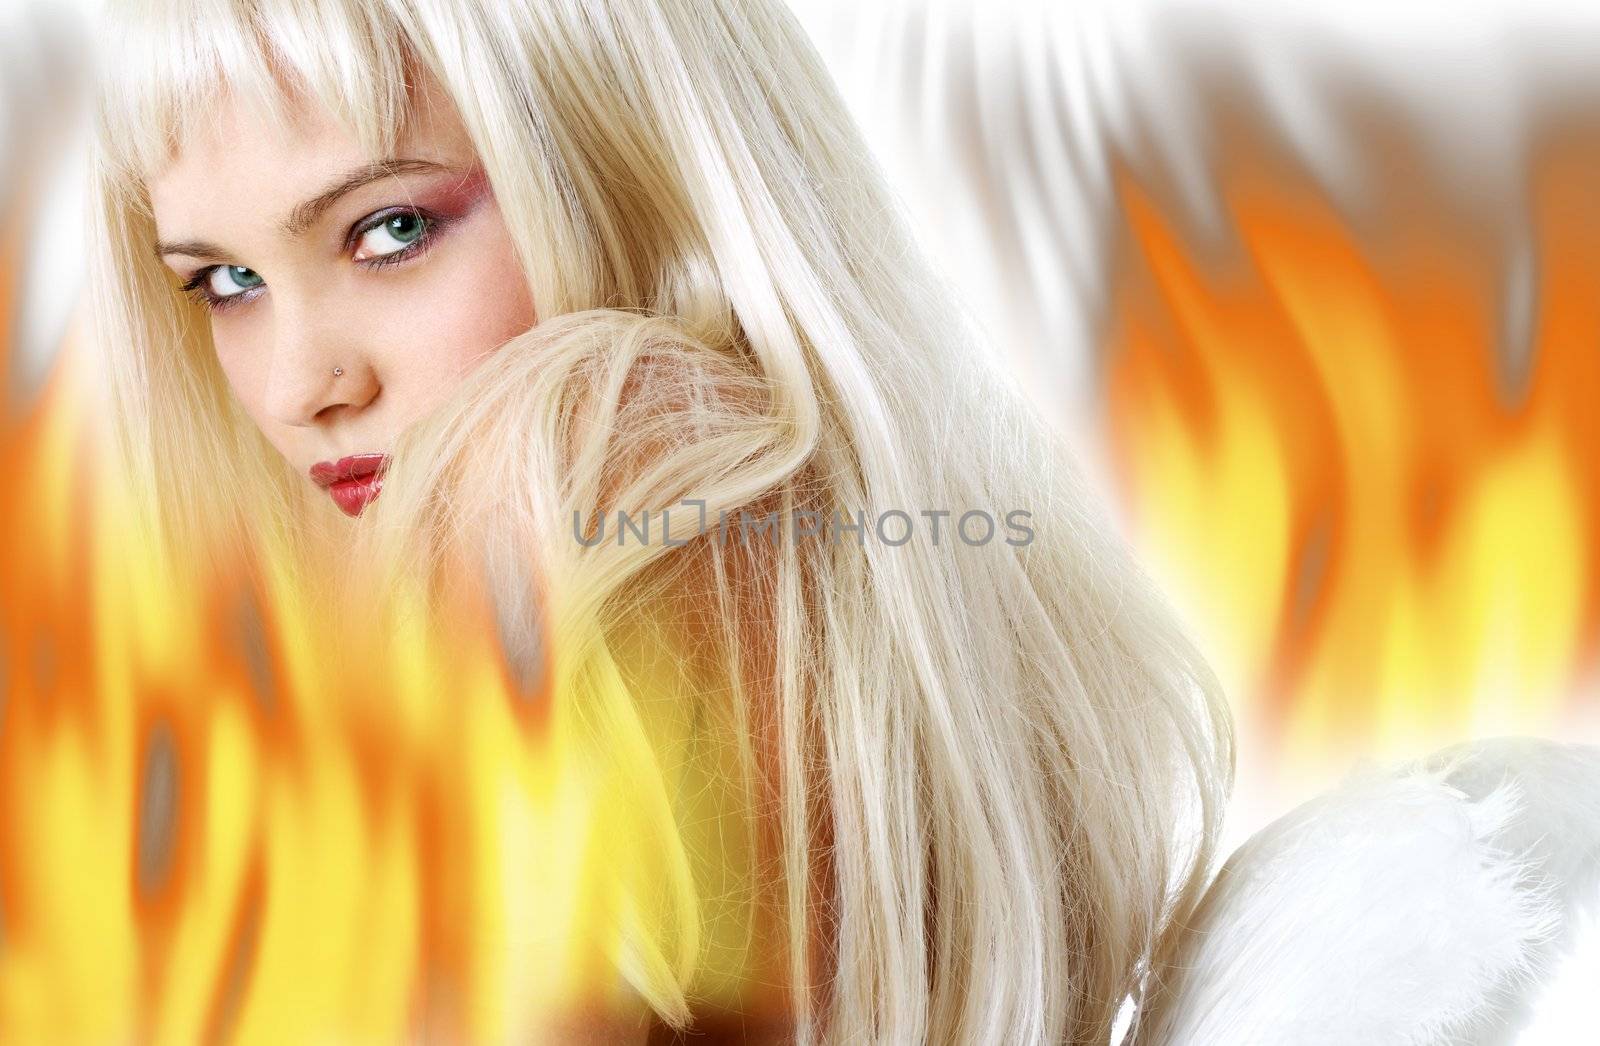 lovely blond with angel wings surrounded by fire